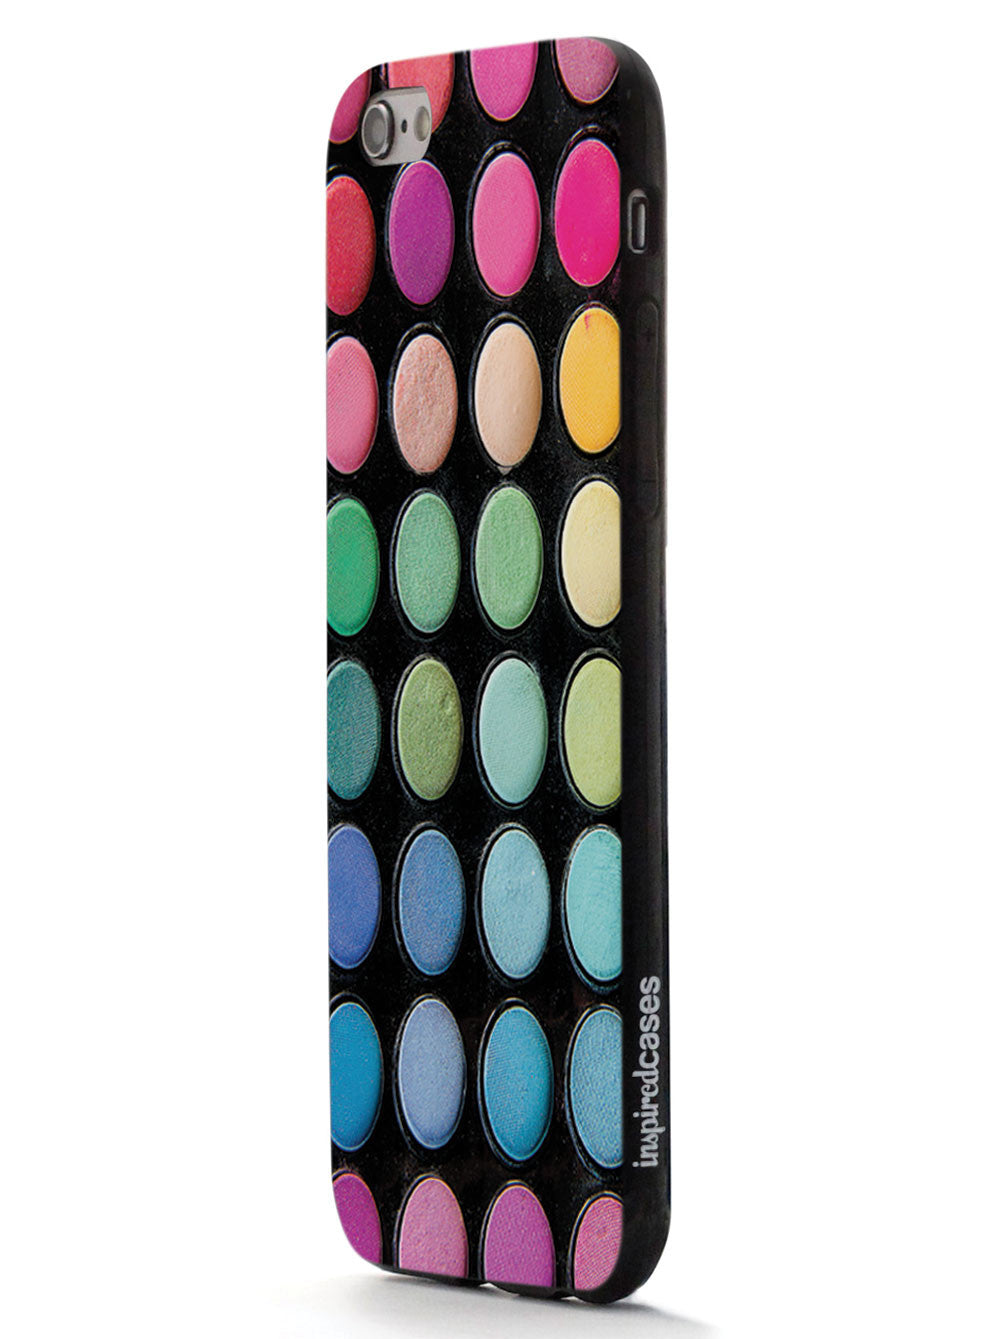 Colorful Eyeshadow Palette Case